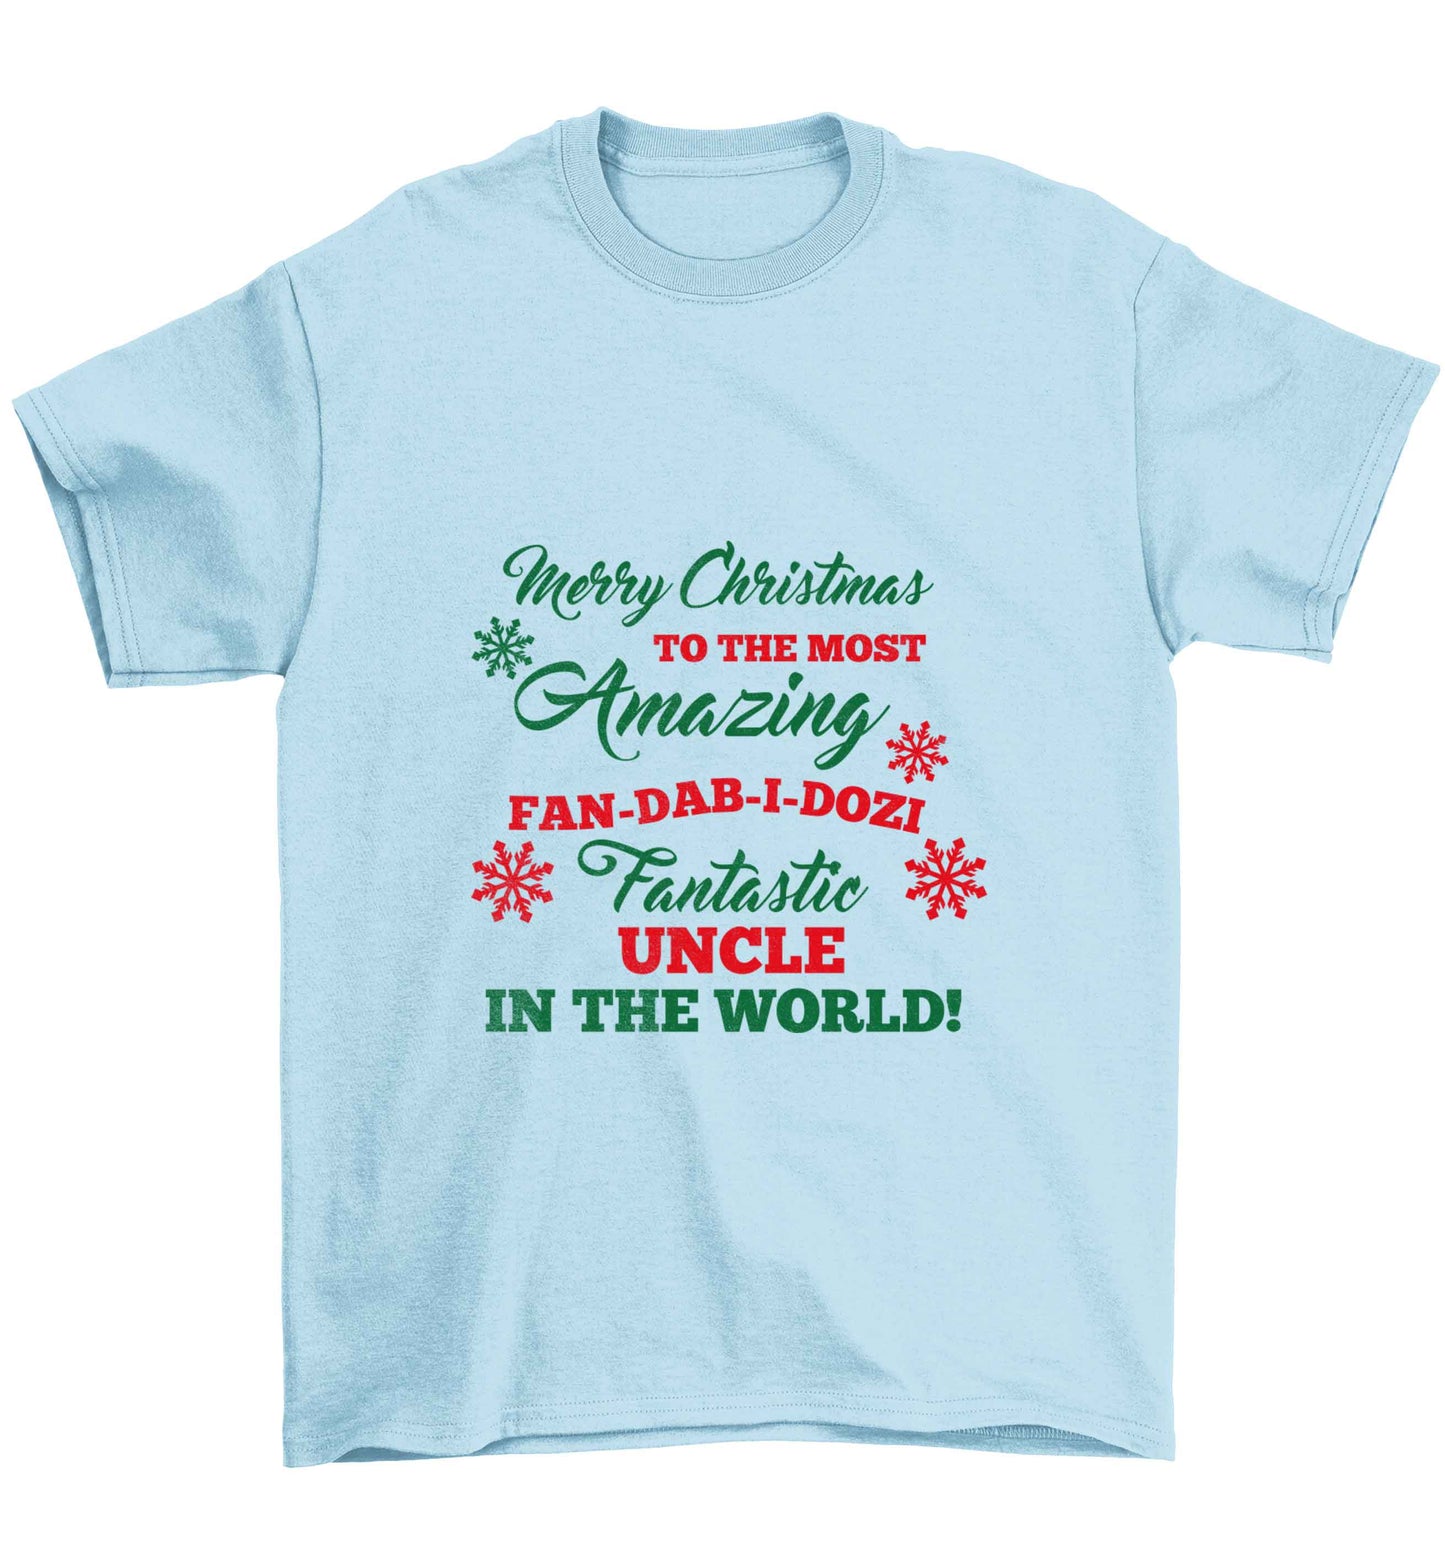 Merry Christmas to the most amazing fan-dab-i-dozi fantasic Uncle in the world Children's light blue Tshirt 12-13 Years